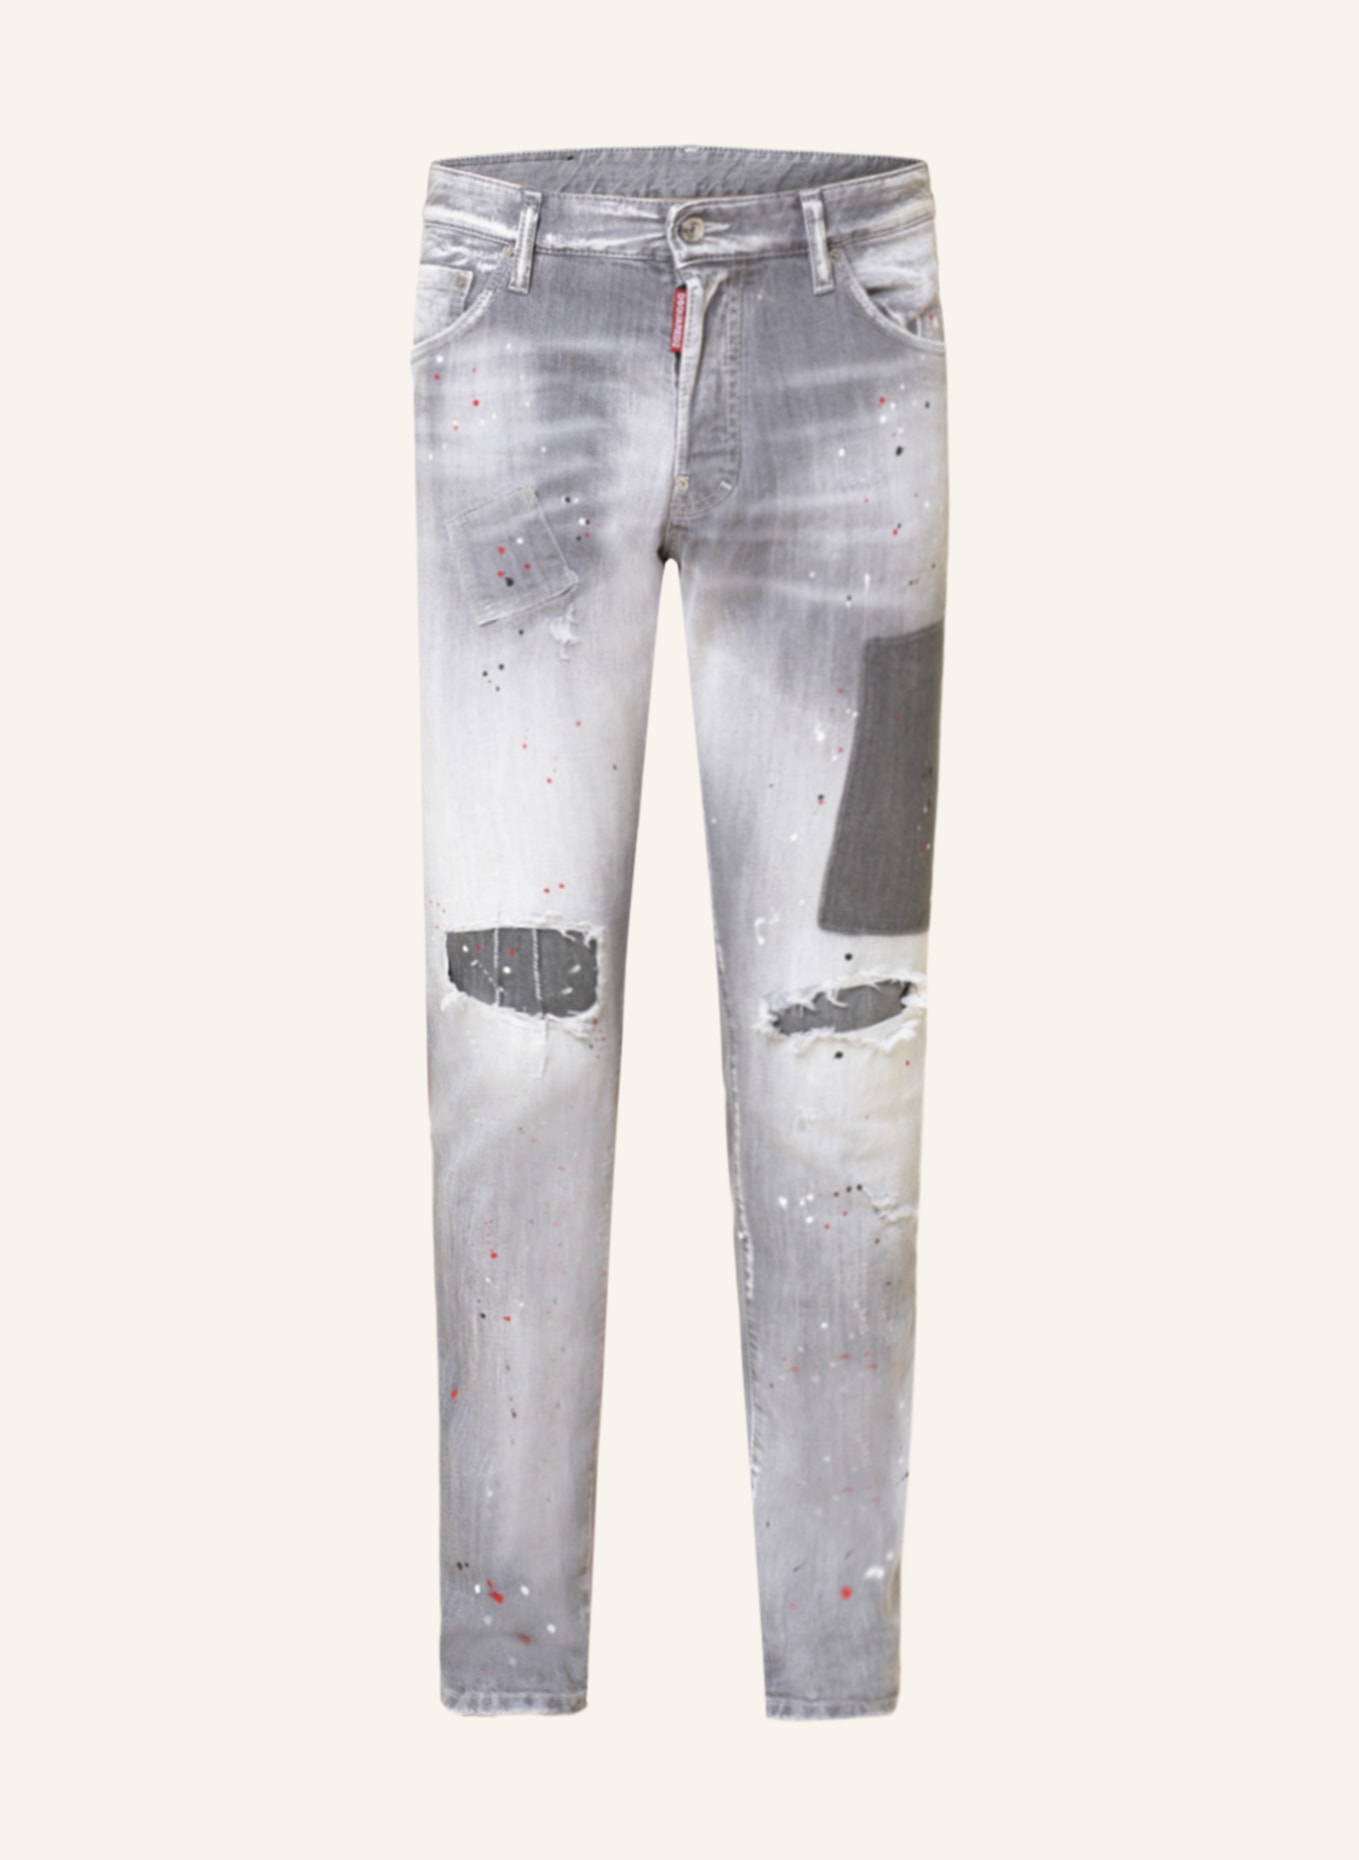 DSQUARED2 Destroyed Jeans COOL GUY Extra Slim Fit , Farbe: 852 LIGHT GREY (Bild 1)